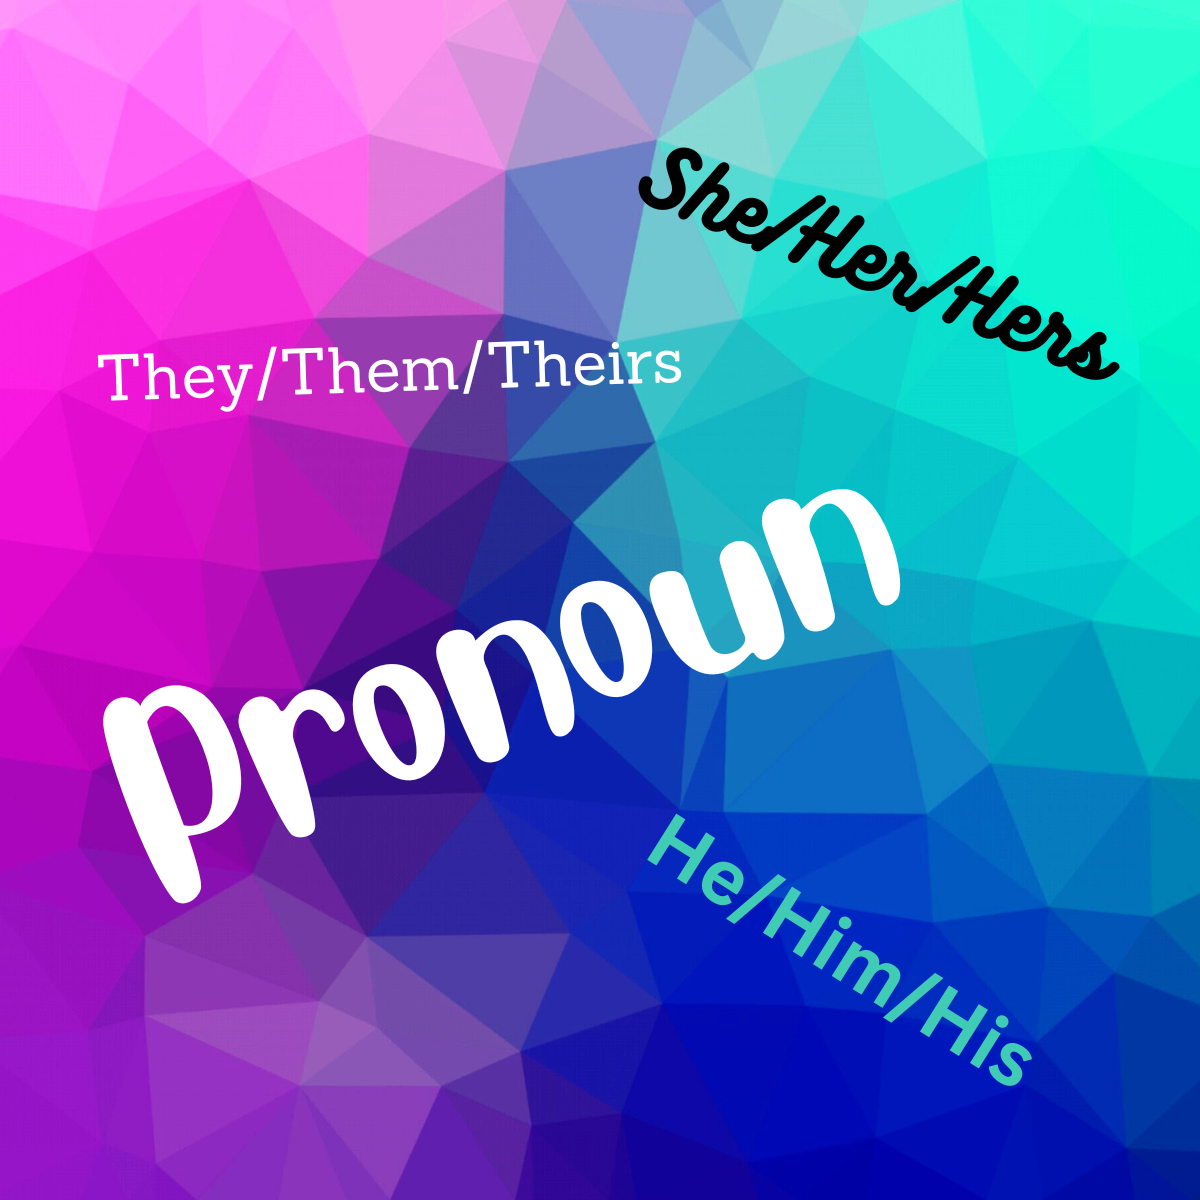 Multi colored back ground with words "Pronoun" "She/her/hers" "They/them/theirs" "He/him/his"